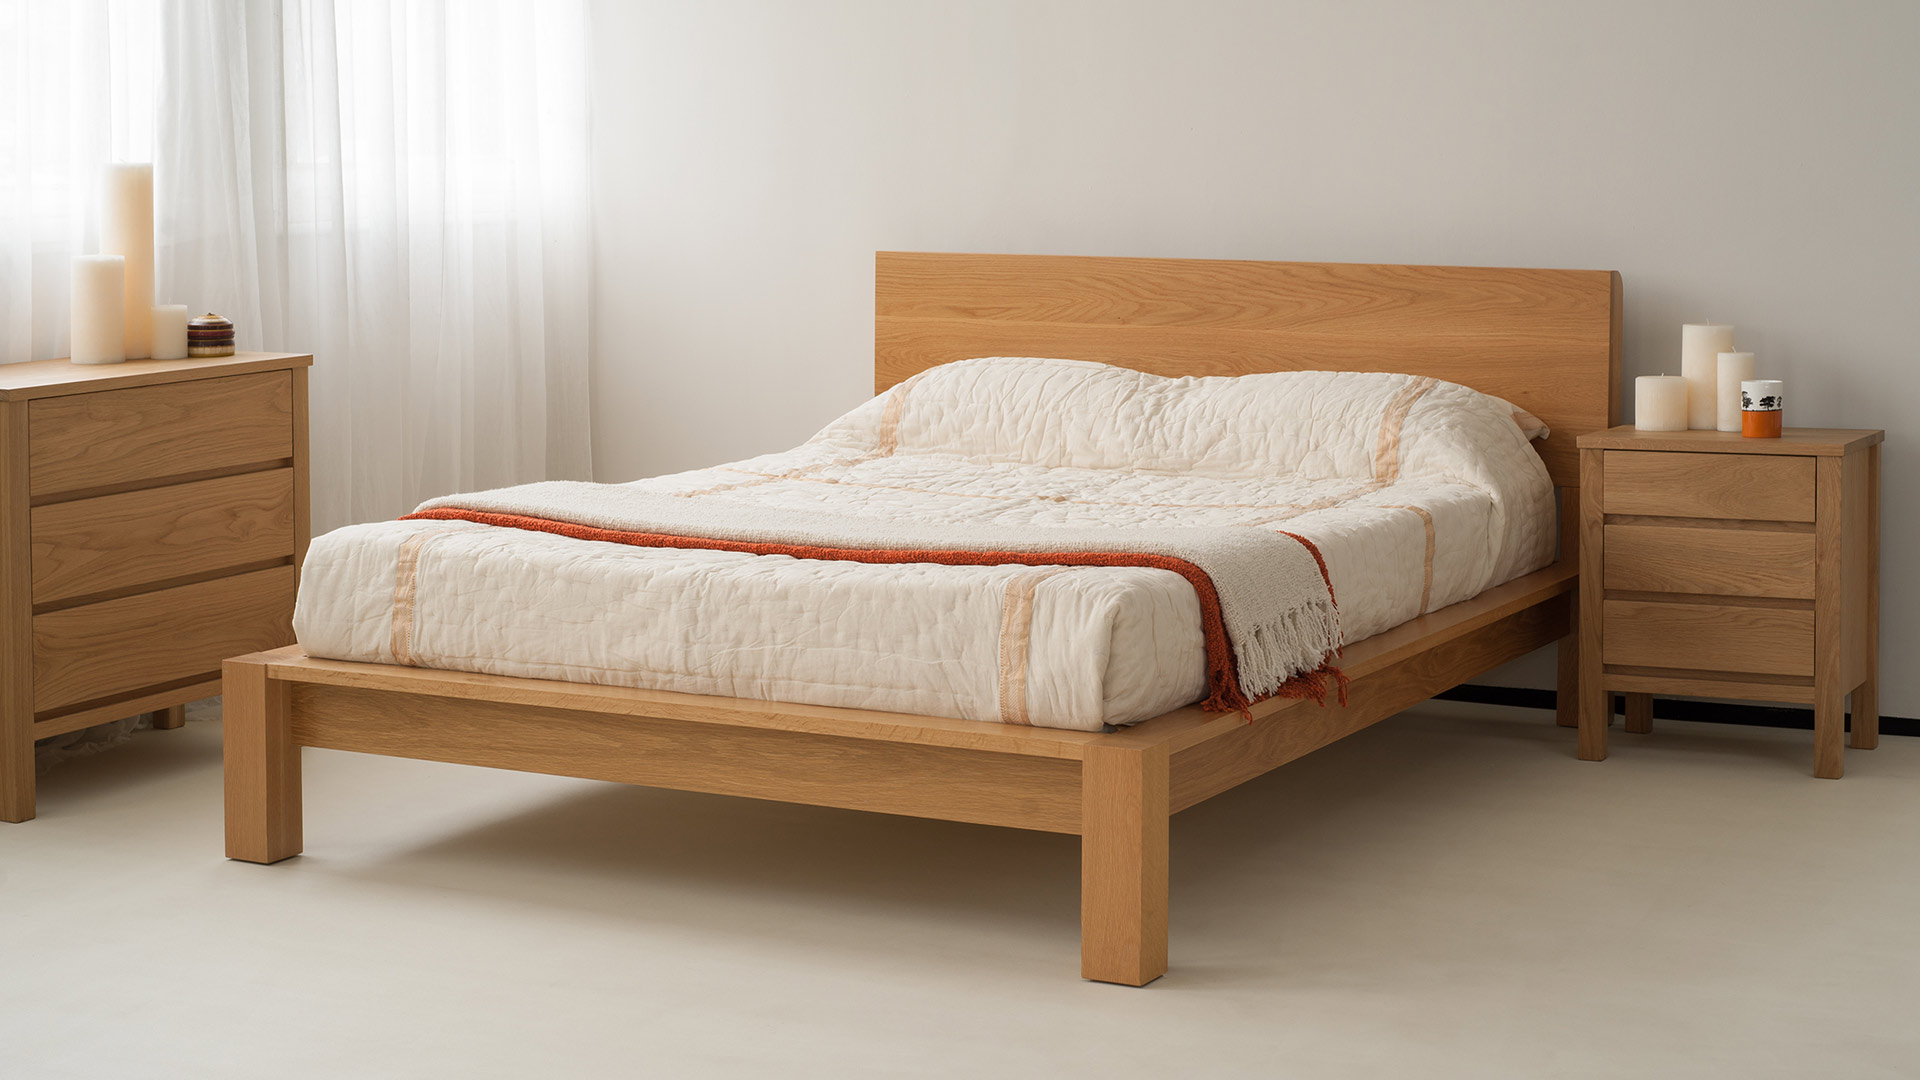 Ocean bed is a chunky contemporary hand made wooden bed shown here in oak